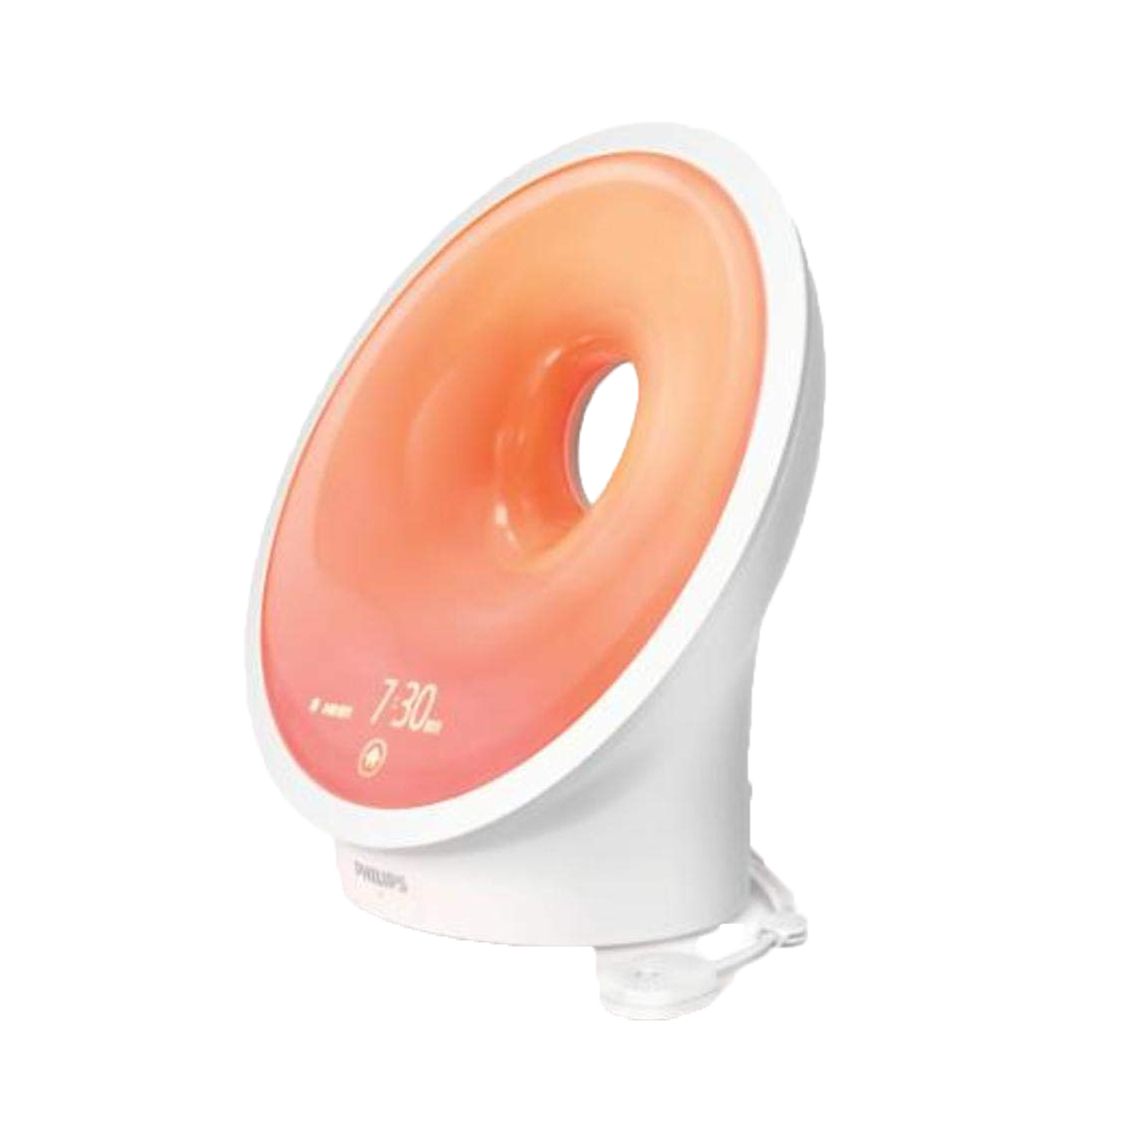 Valentine’s Day gifts for him - Philips SmartSleep Light Therapy Lamp